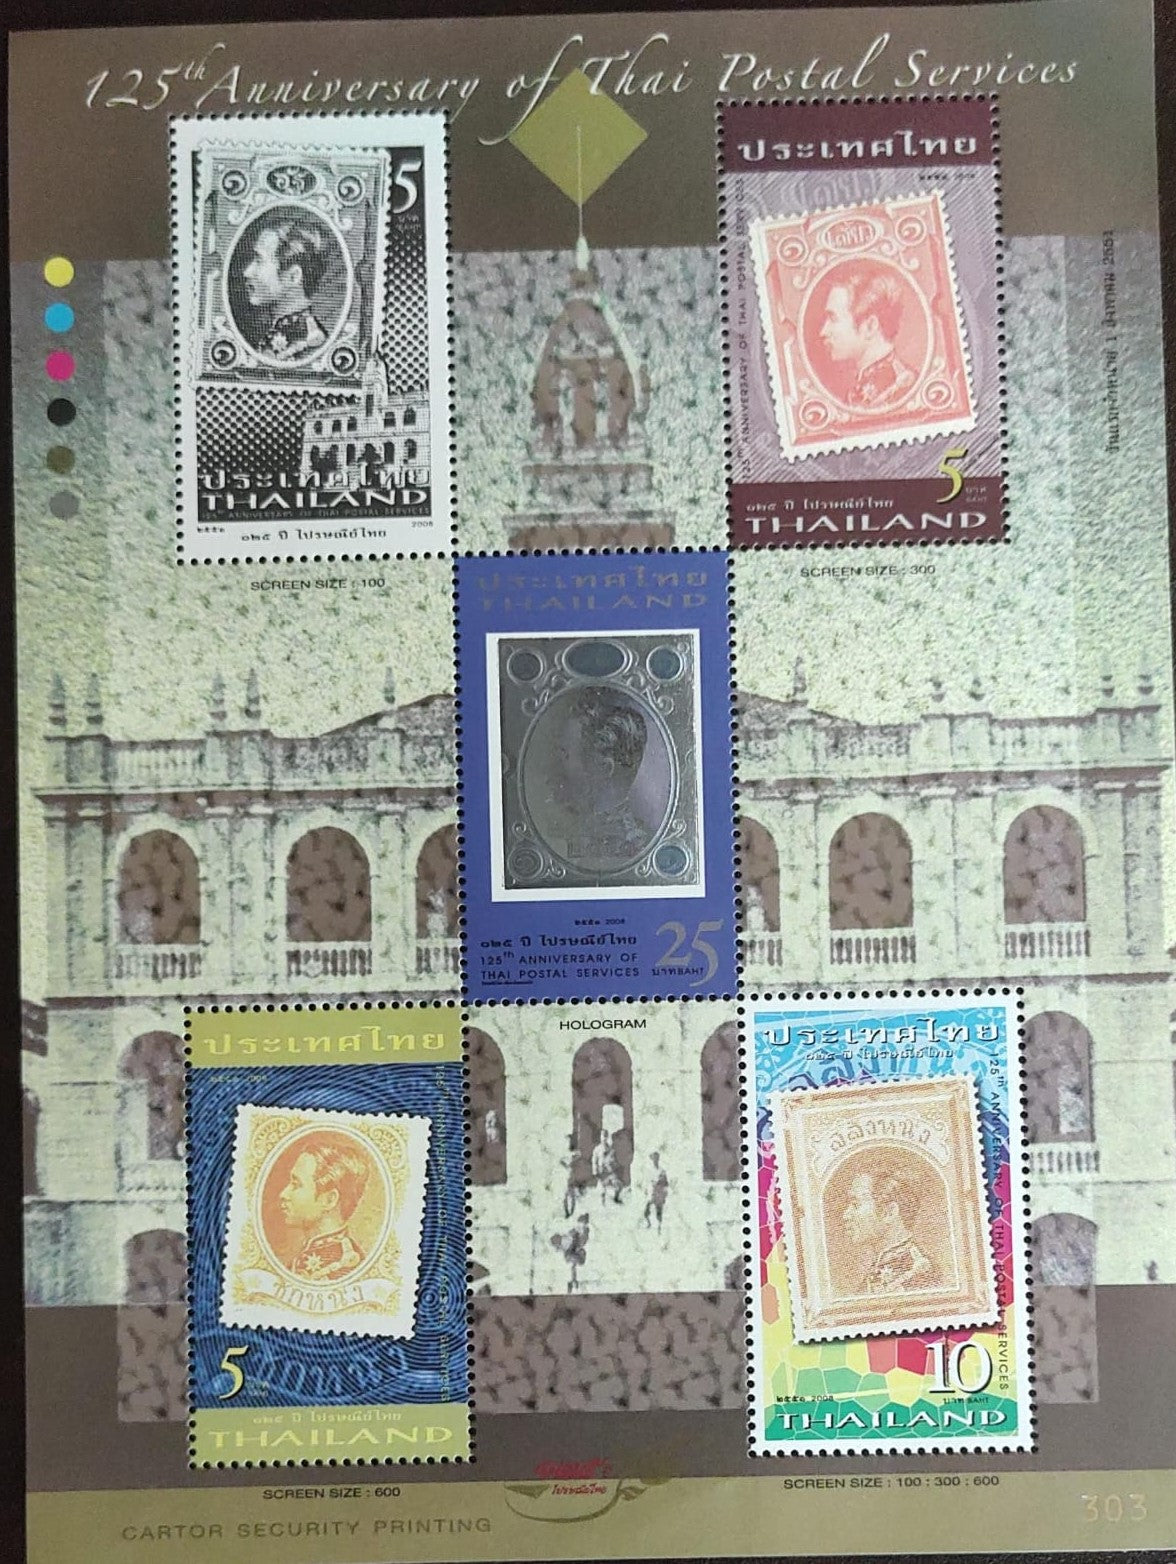 Thailand ms with centre stamp hologram.